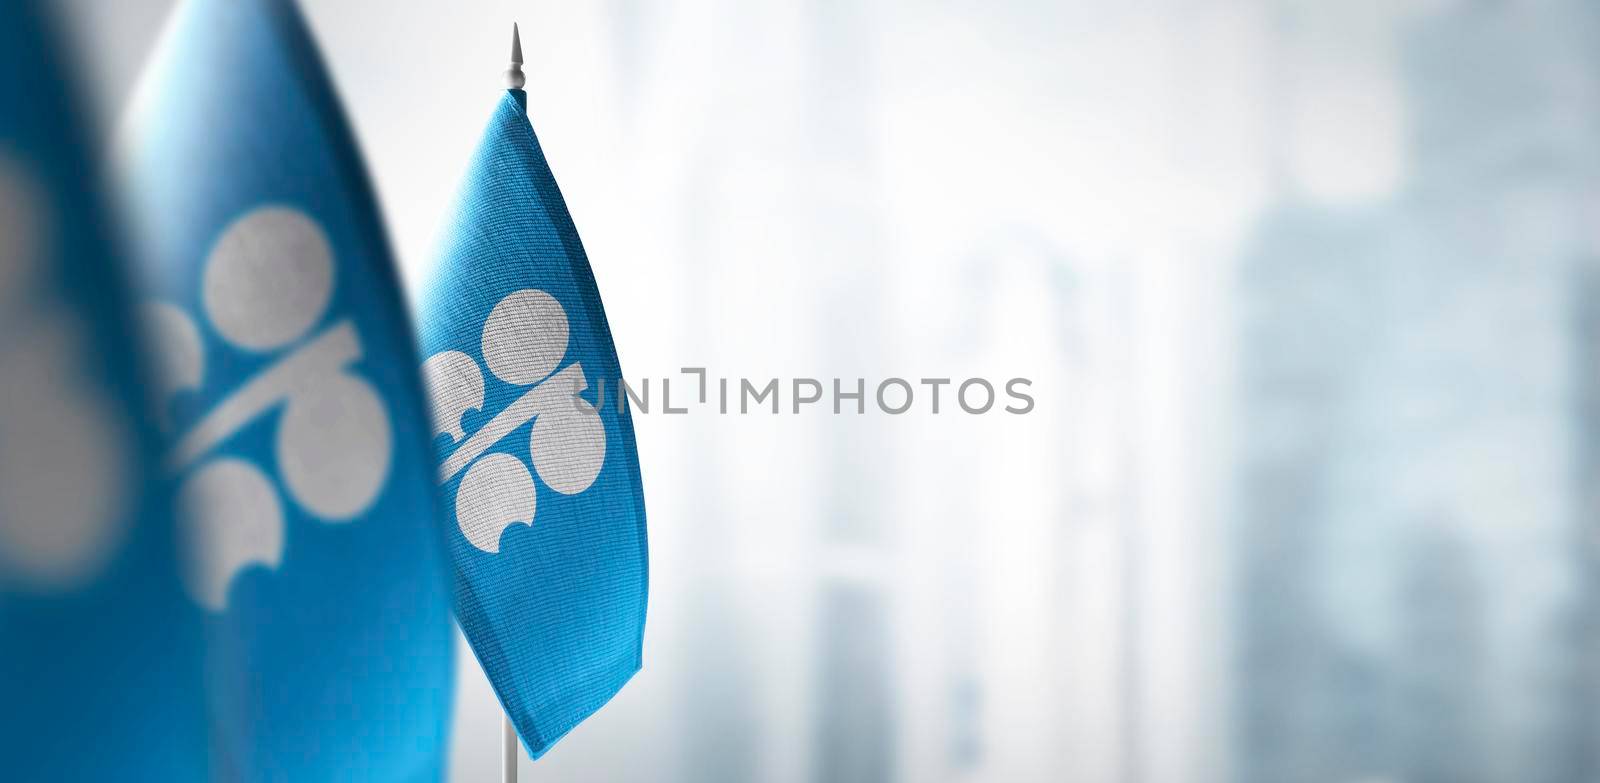 Small flags of Organization of the Petroleum Exporting Countries on a blurry background of the city.